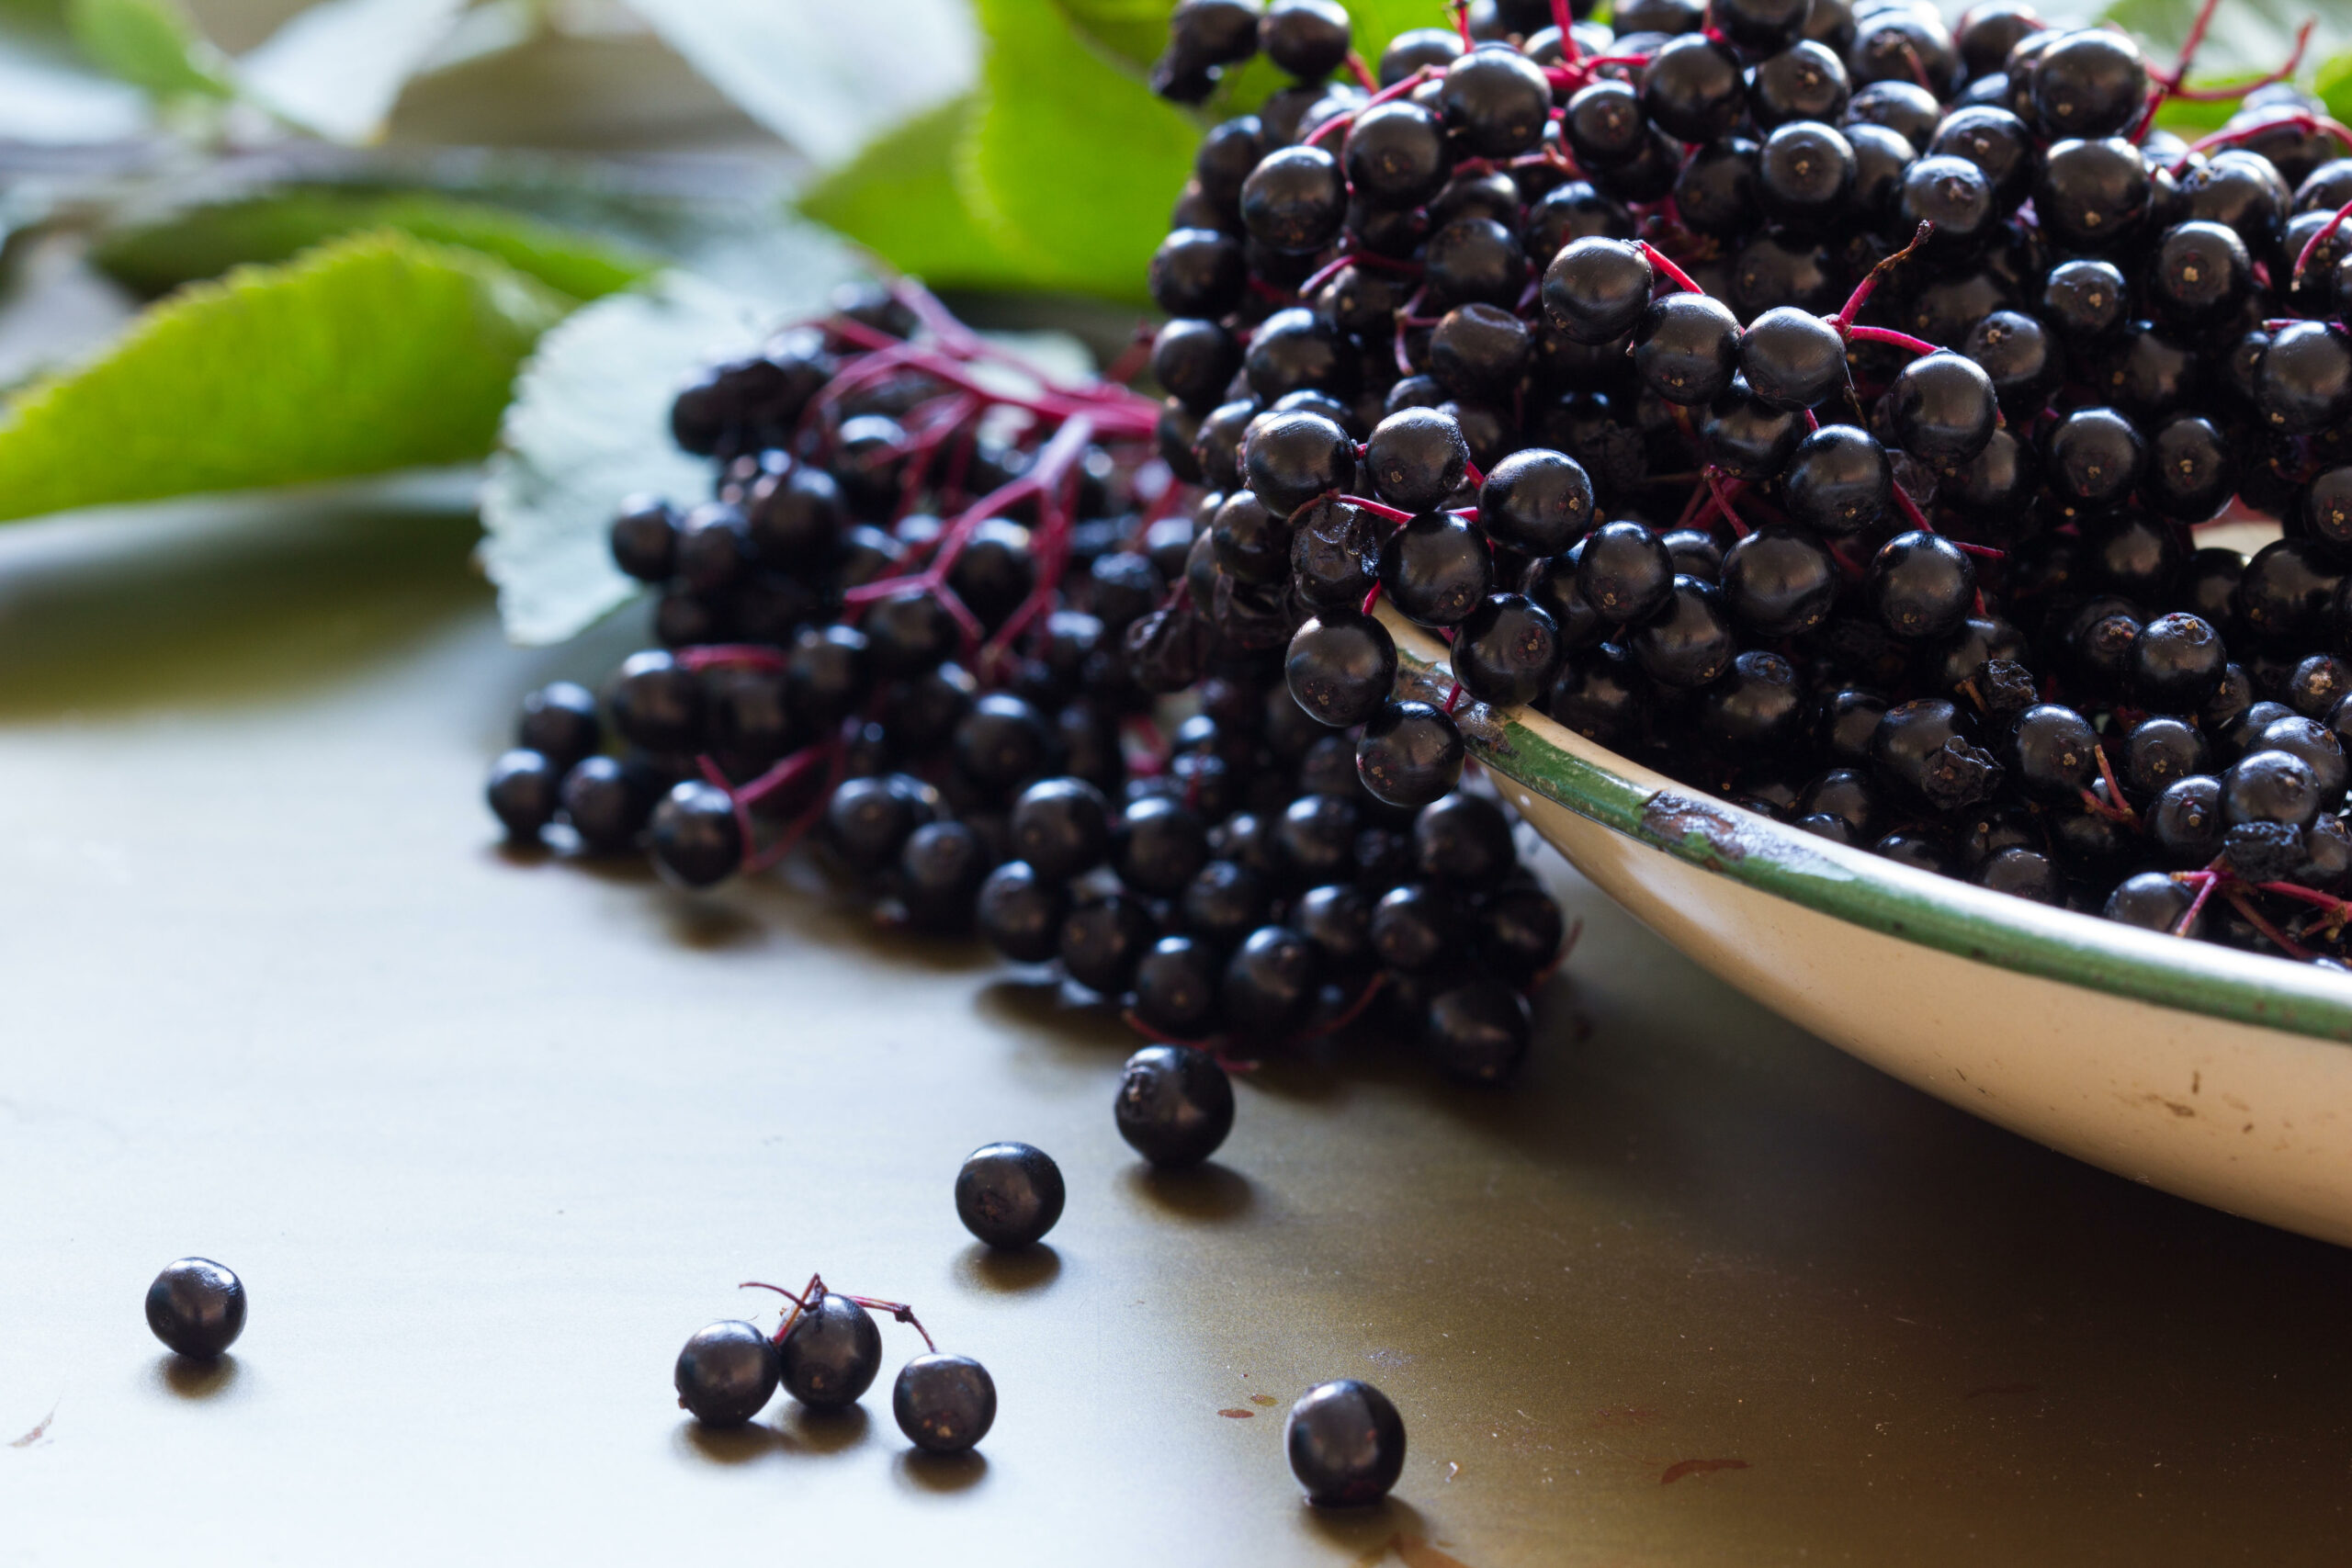 Eight tasty berries you can find in the wild